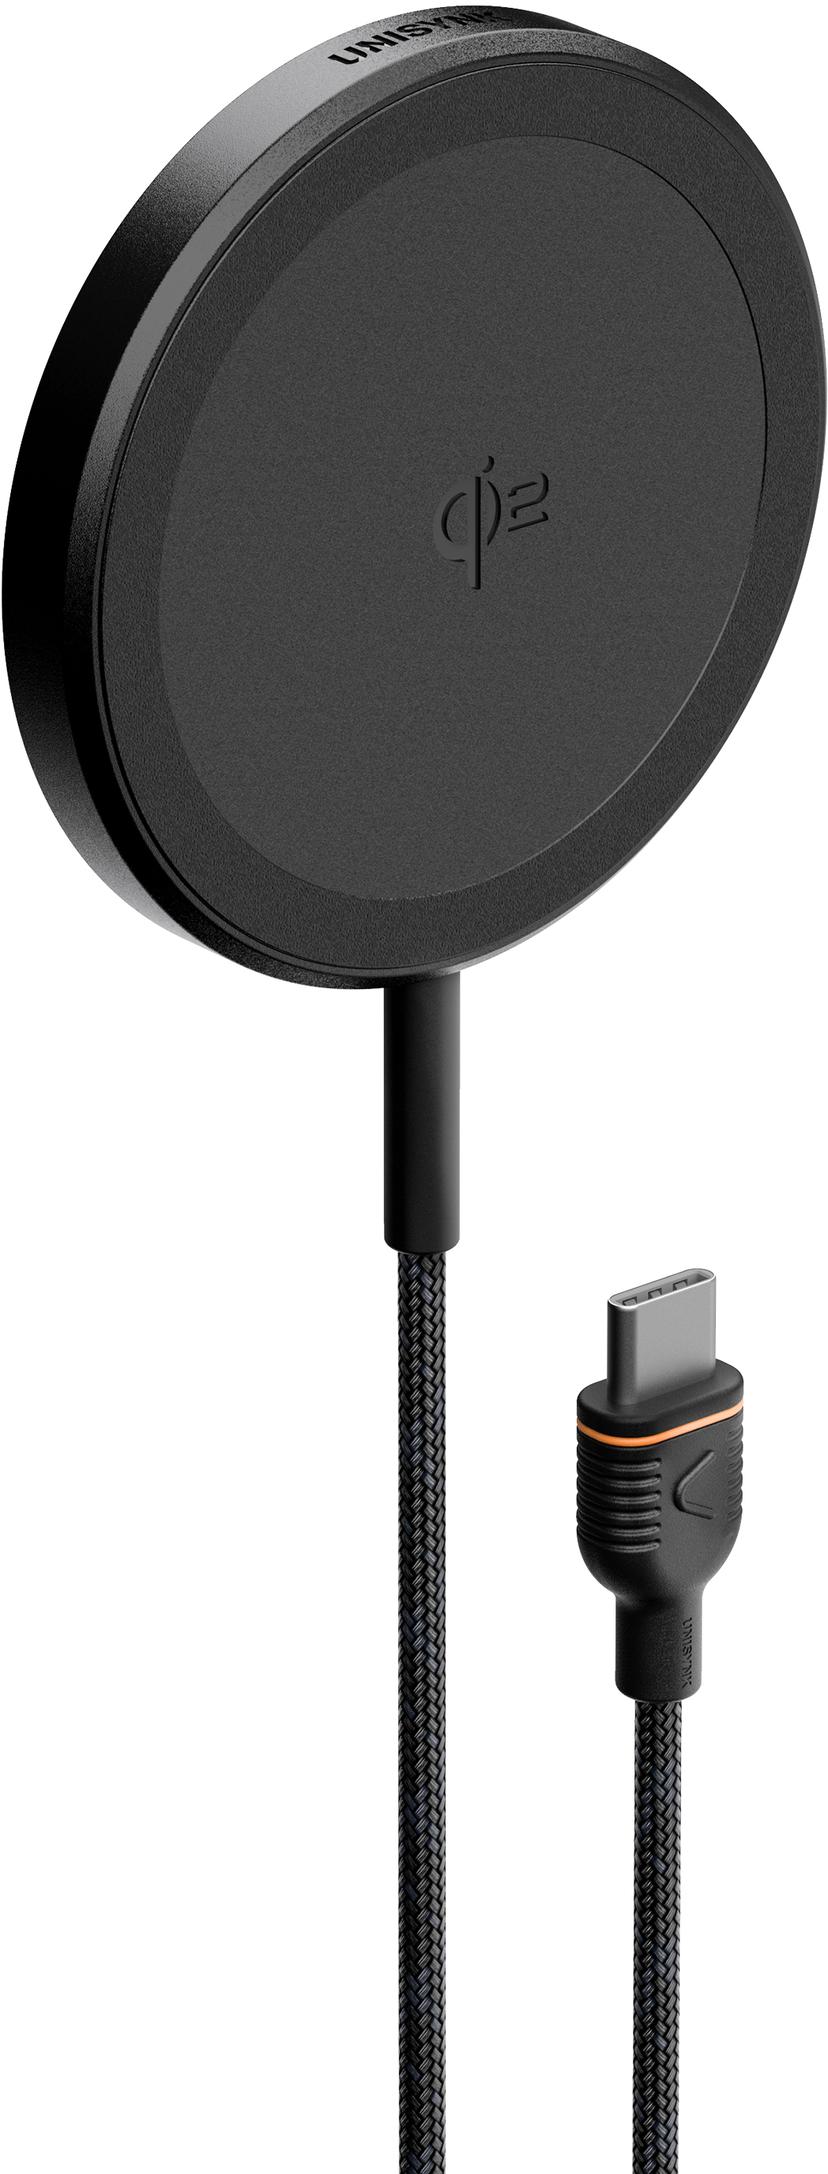 Unisynk Magnetic Wireless Charger Qi2 15W